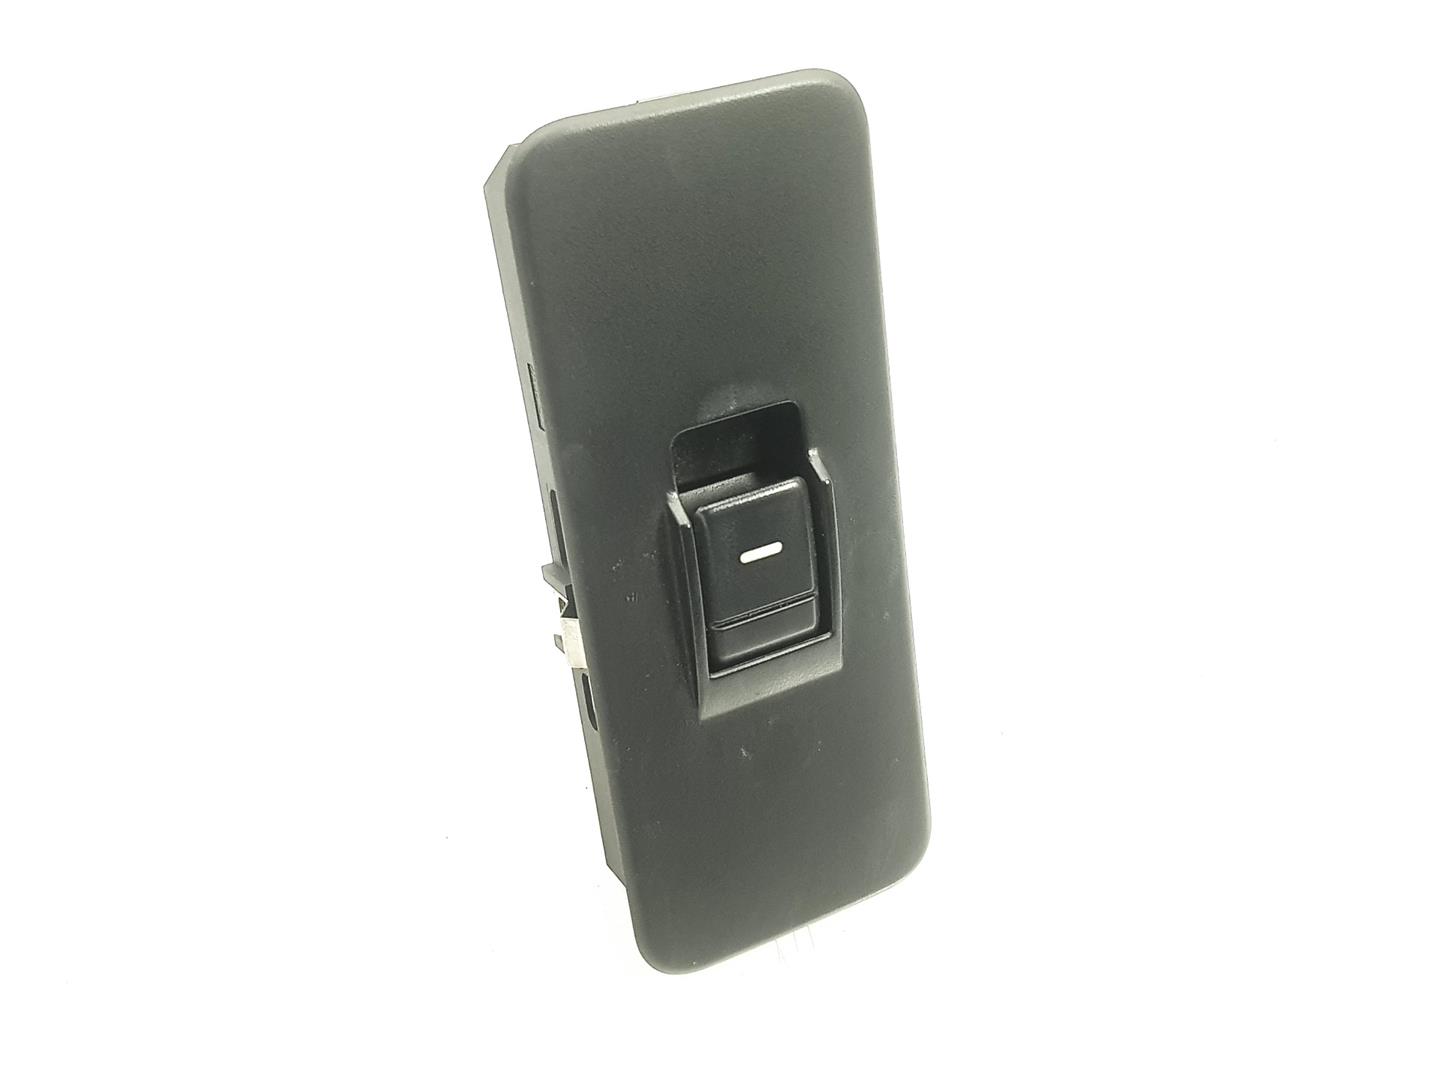 LAND ROVER Discovery 3 generation (2004-2009) Front Right Door Window Switch YUD501070PVJ, 5H2214K147ACA8PVJ 24154046